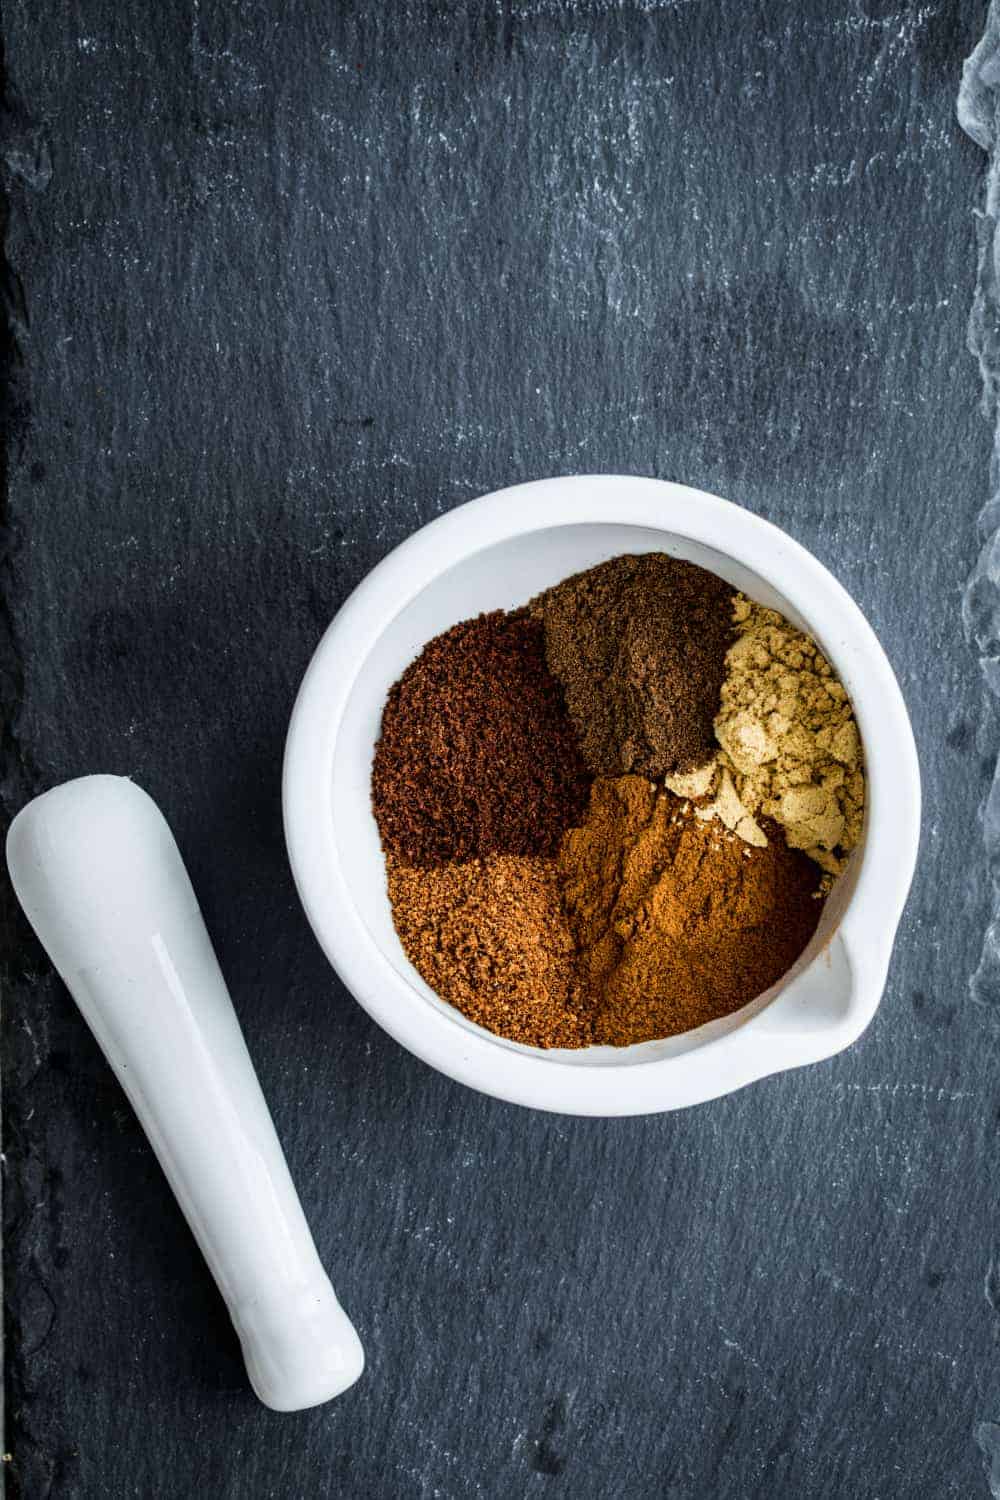 Pumpkin Pie Spice is so simple to make at home! So perfect for fall baking.